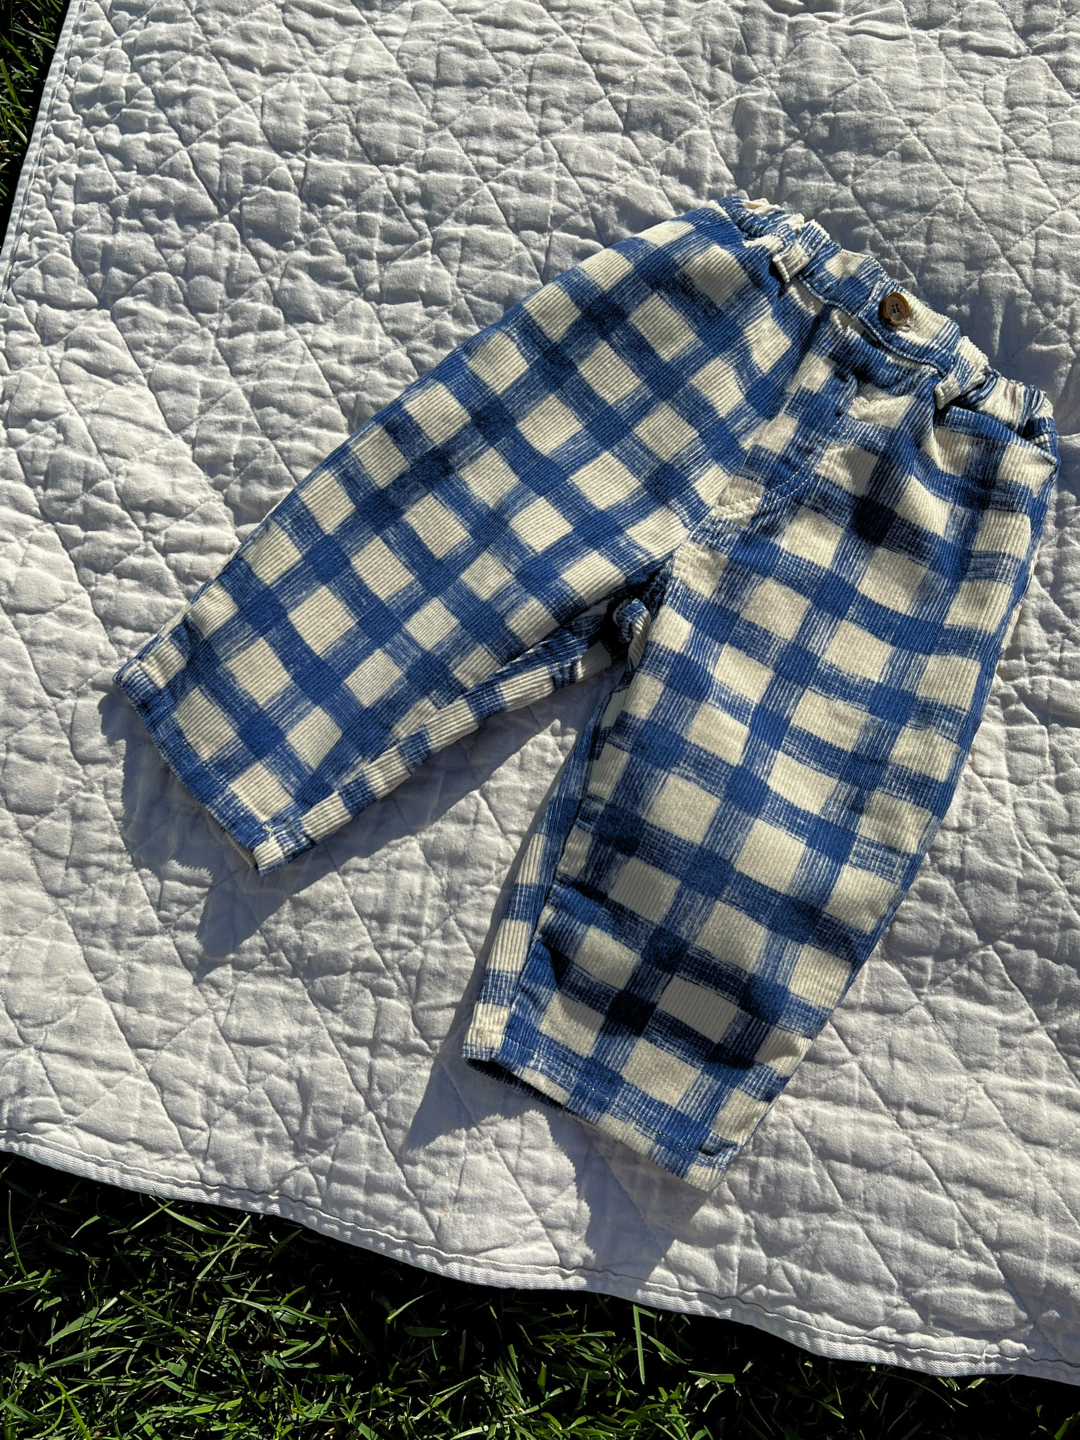 Front view of kids corduroy trousers in white with a large blue grid check pattern. Pants are shown on a white canvas blanket on grass.